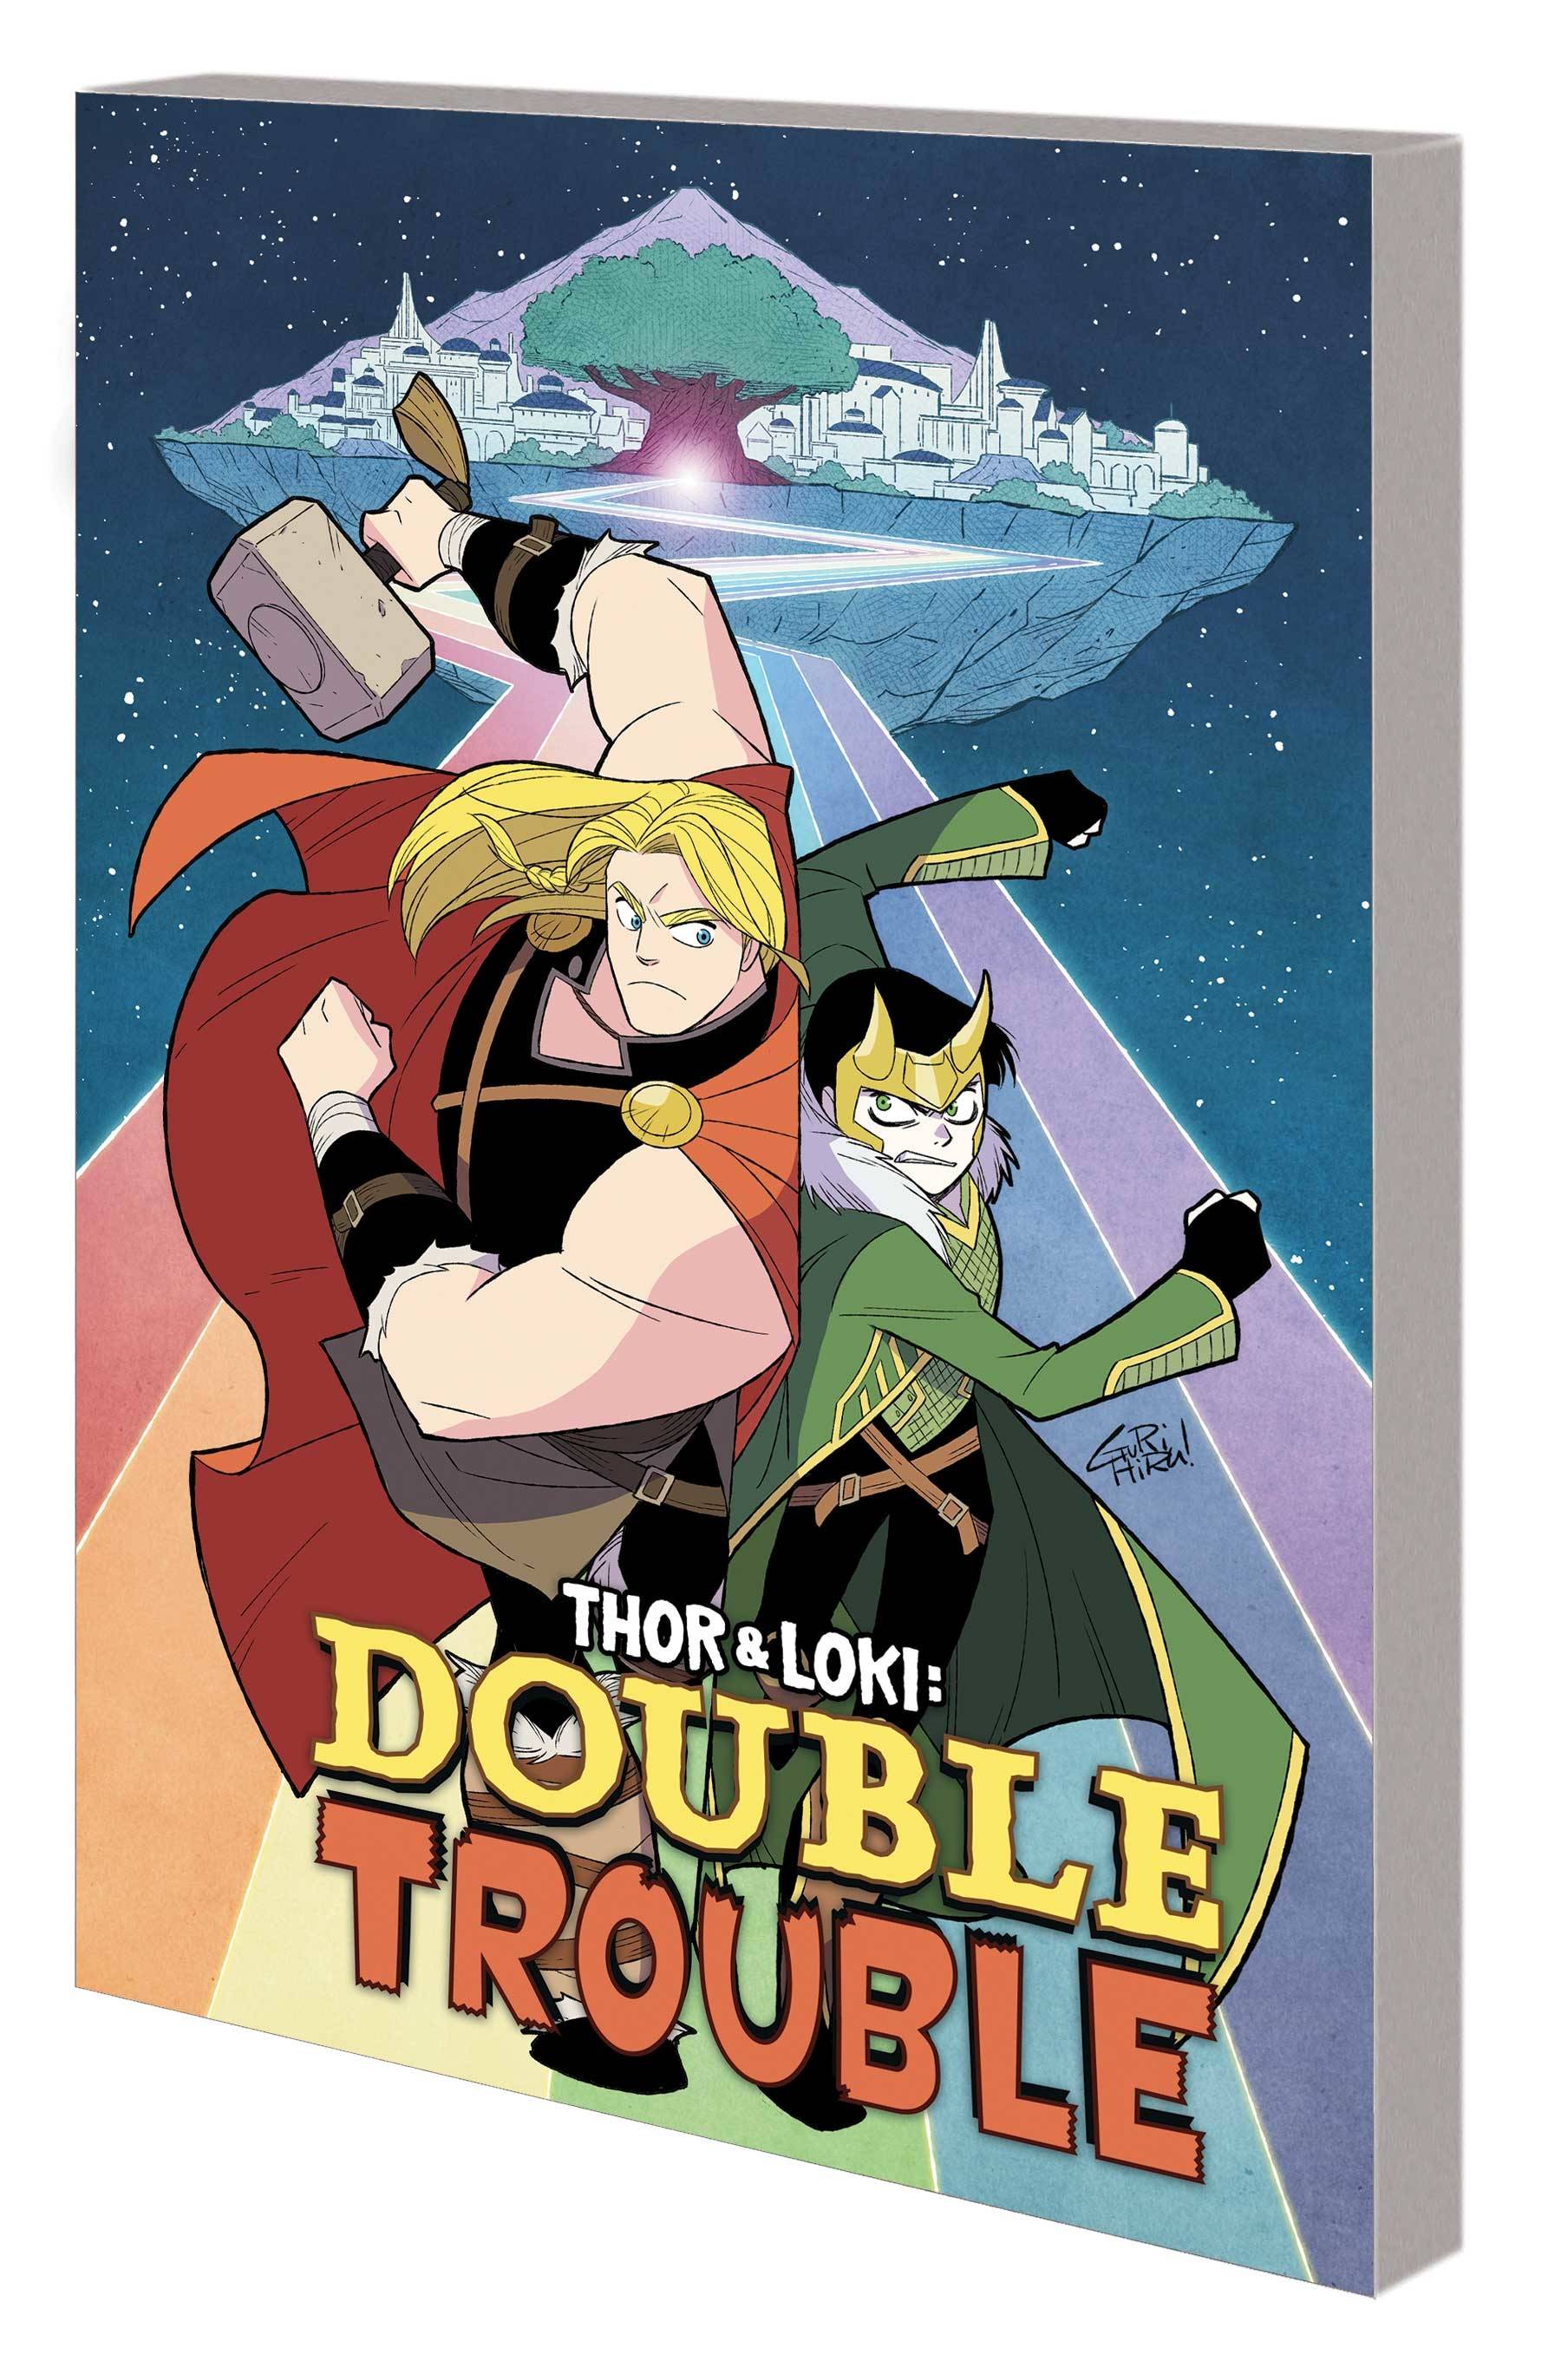 THOR AND LOKI GN 01 DOUBLE TROUBLE